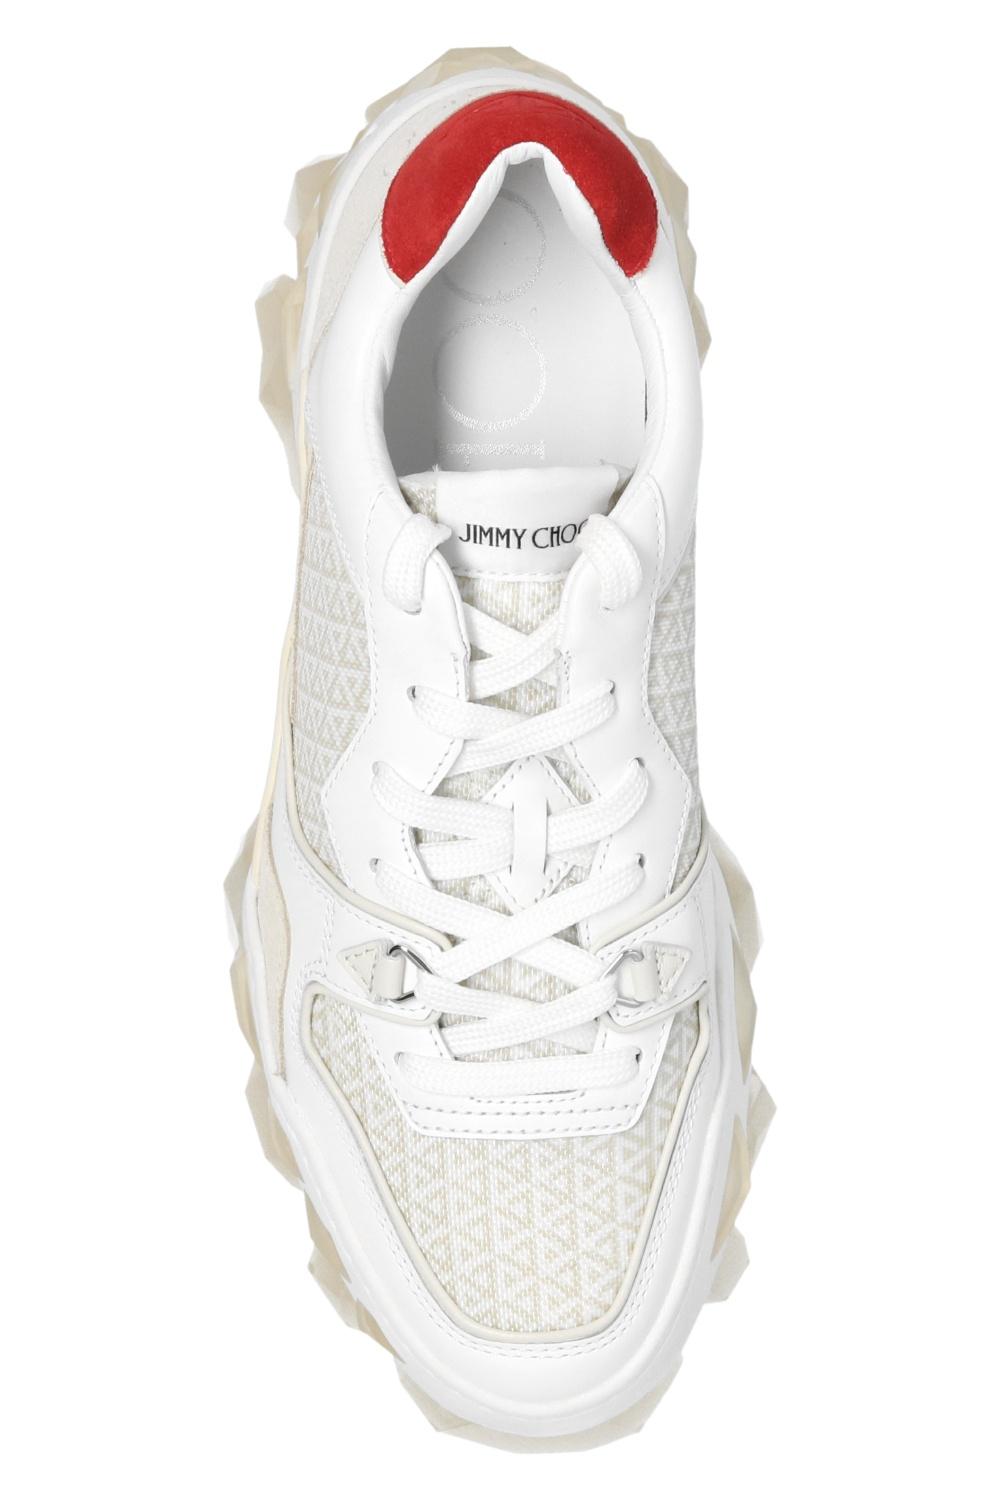 Jimmy Choo Leather 'diamond X Trainer' Sneakers in White for Men 